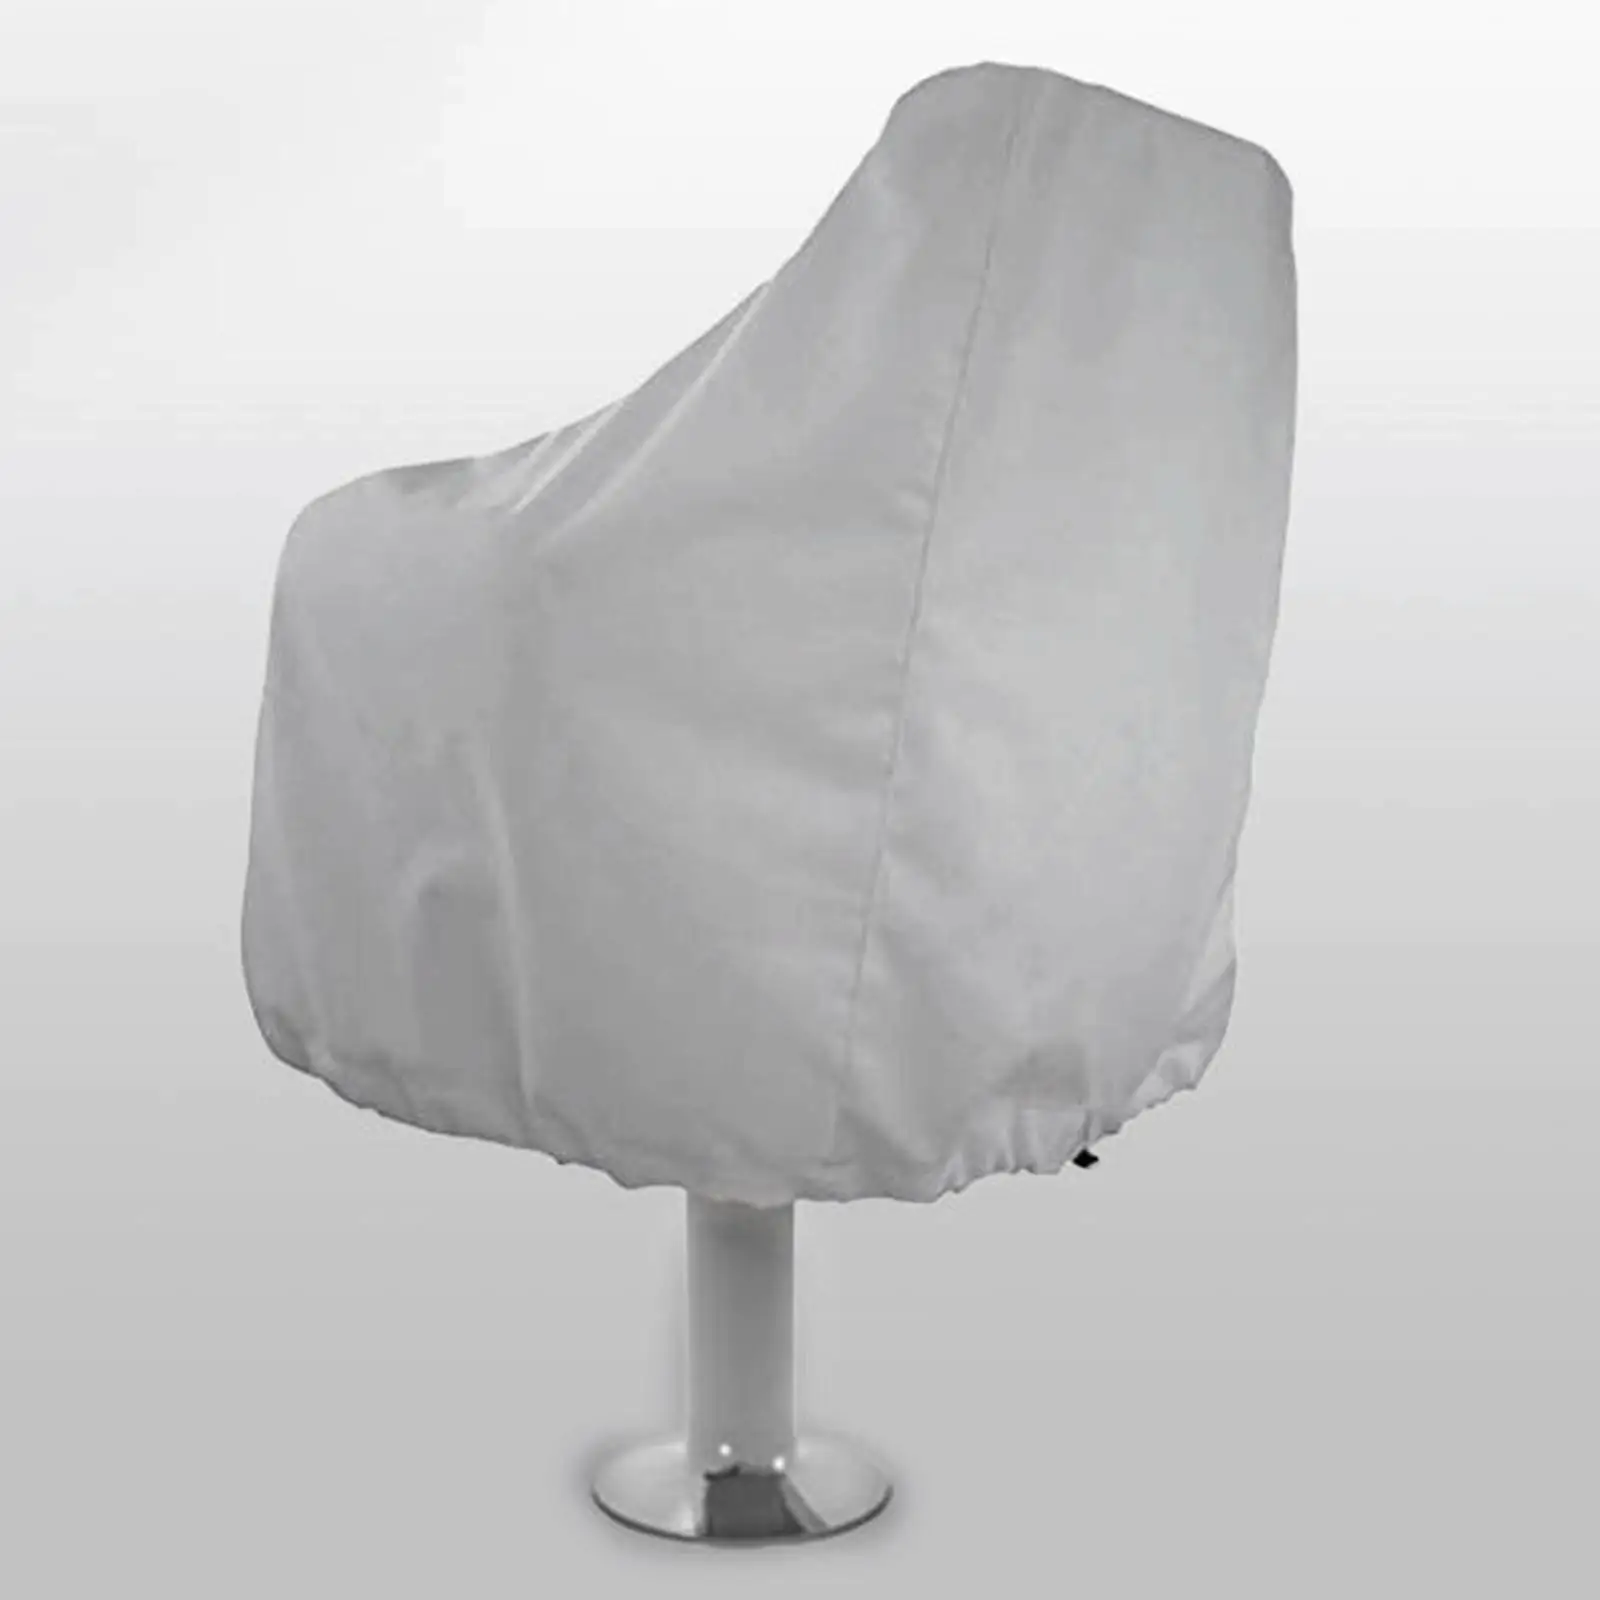 Boat Seat Cover Outdoor Foldable Ship Fishing Waterproof Dust     Yacht Furniture  22x24x25.2inch